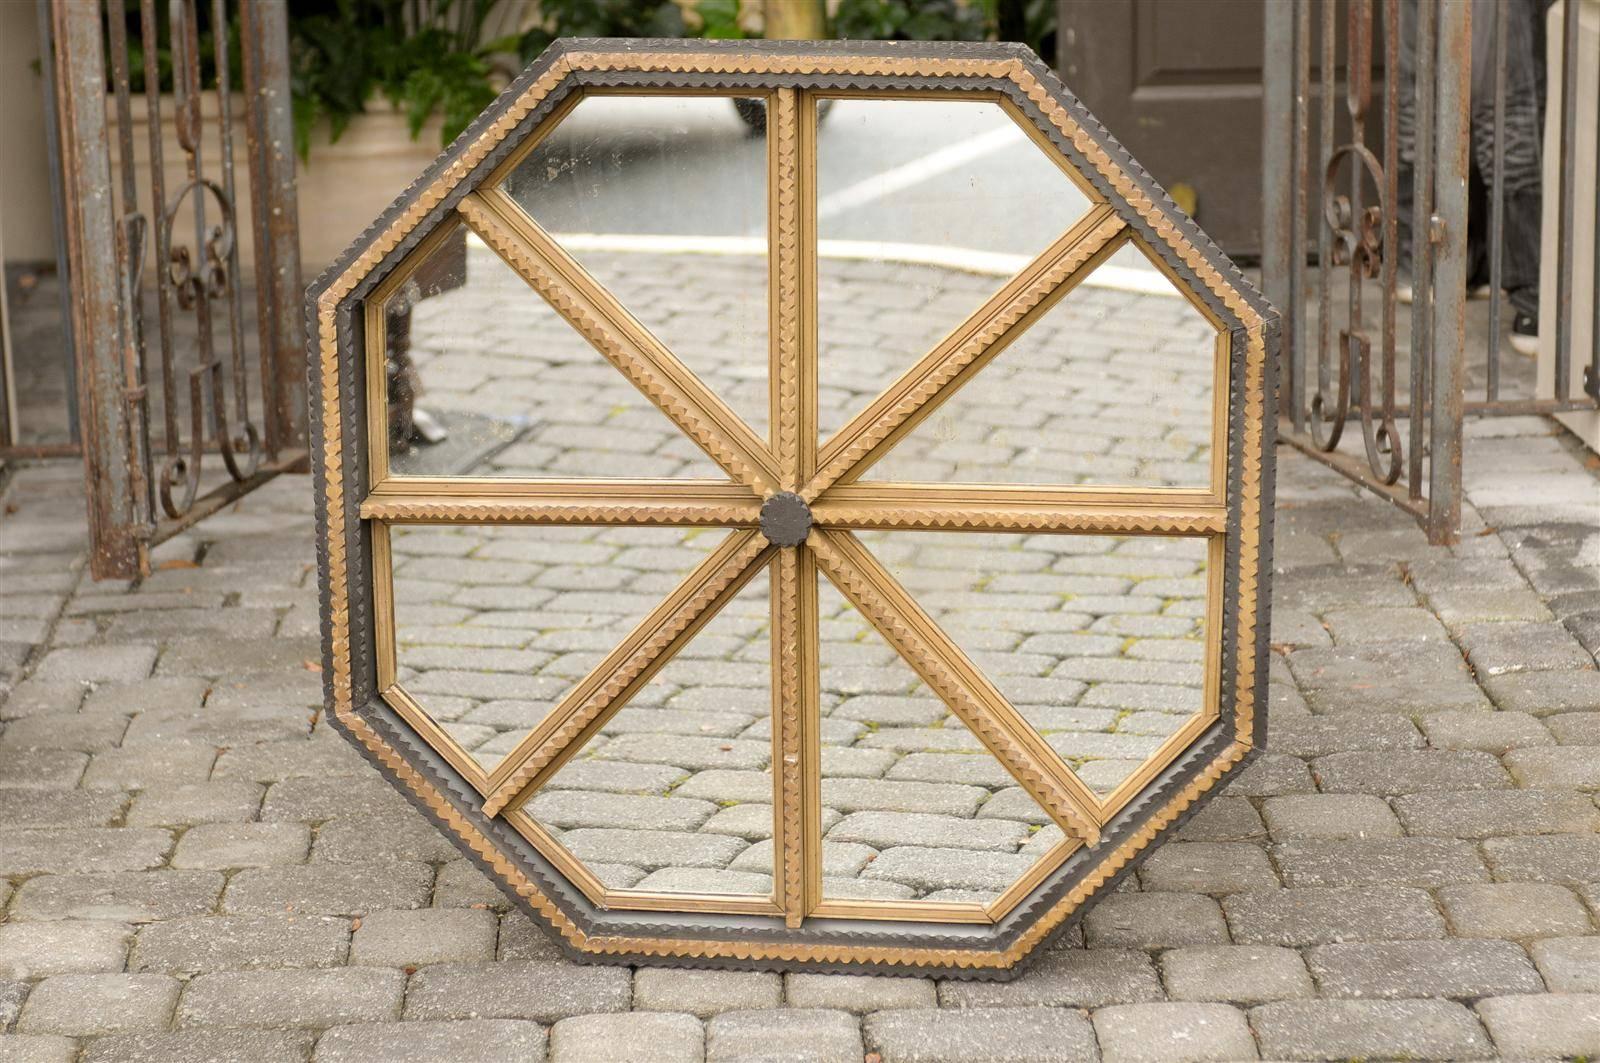 This American Tramp Art mirror from the mid 20th century features an octagonal frame painted in gold and black. The mirrored part is separated into sections, radiating from a black painted medallion in the center. The simple décor is made of carved